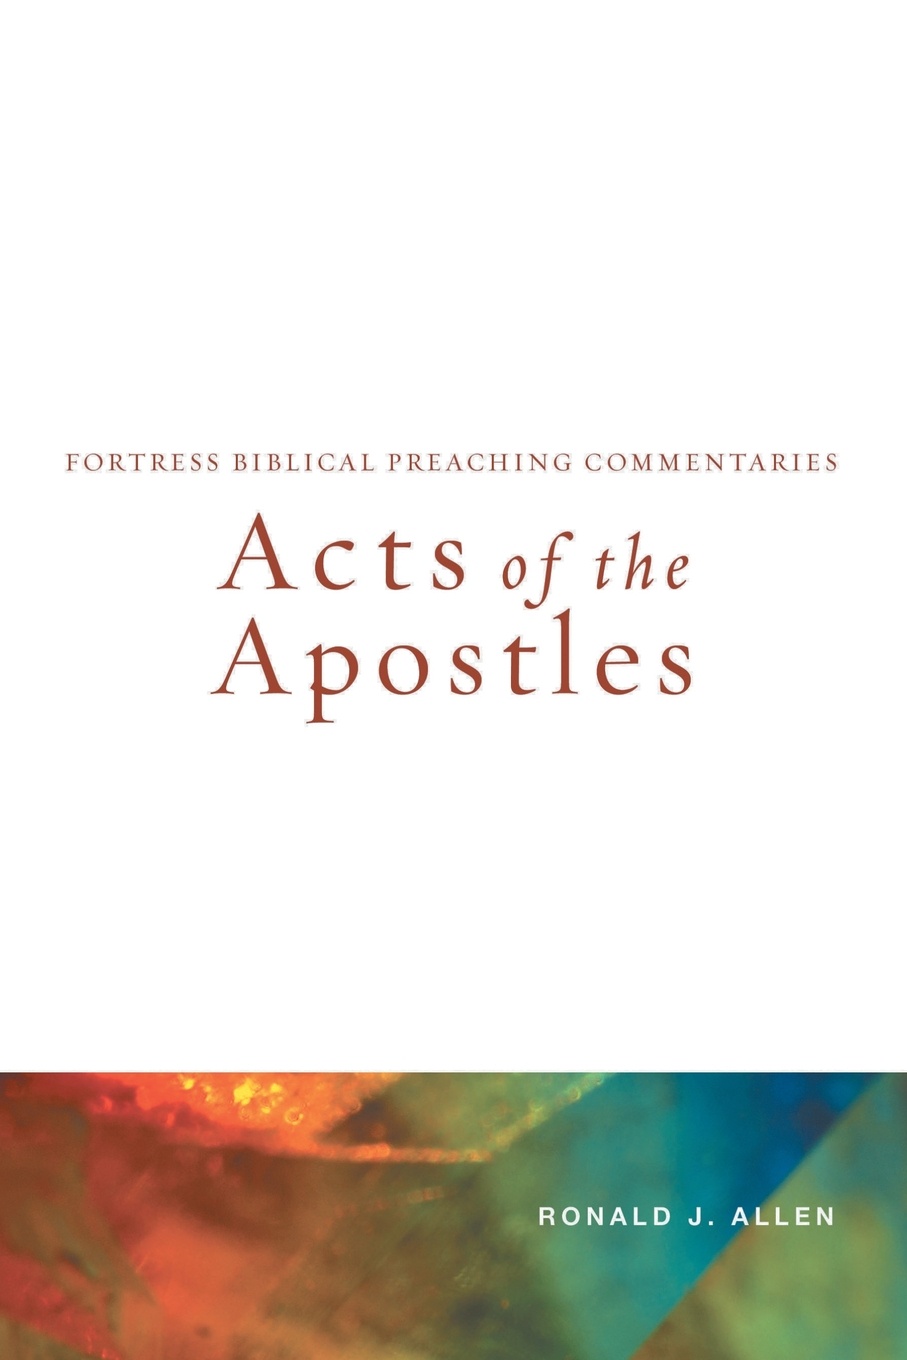 Acts of the Apostles. Fortress Biblical Preaching Commentaries